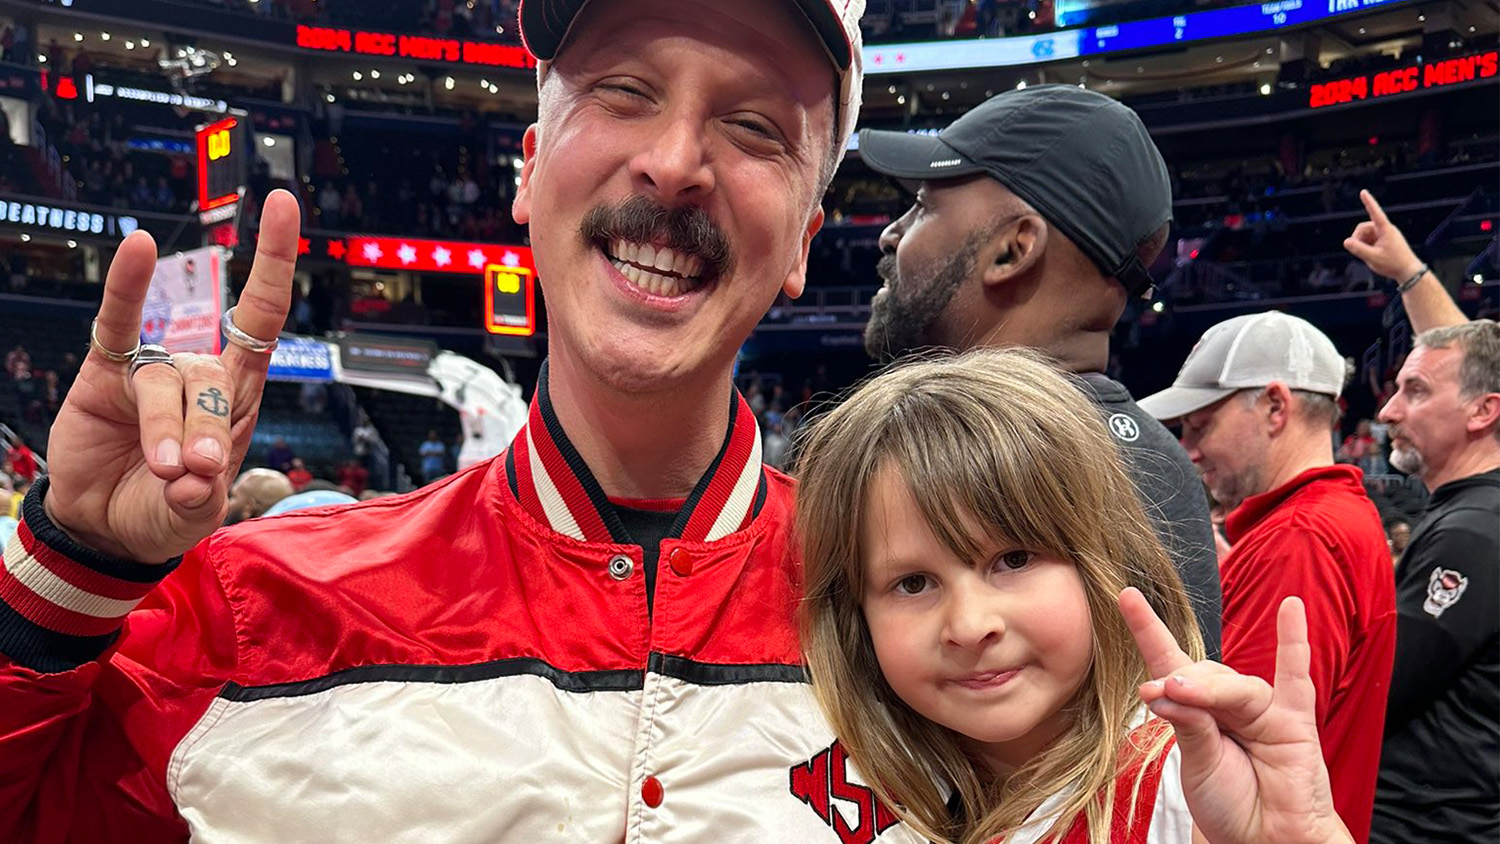 American Aquarium frontman BJ Barham celebrates NC State basketball's first ACC Tournament championship in 37 years with his daughter, Pearl.